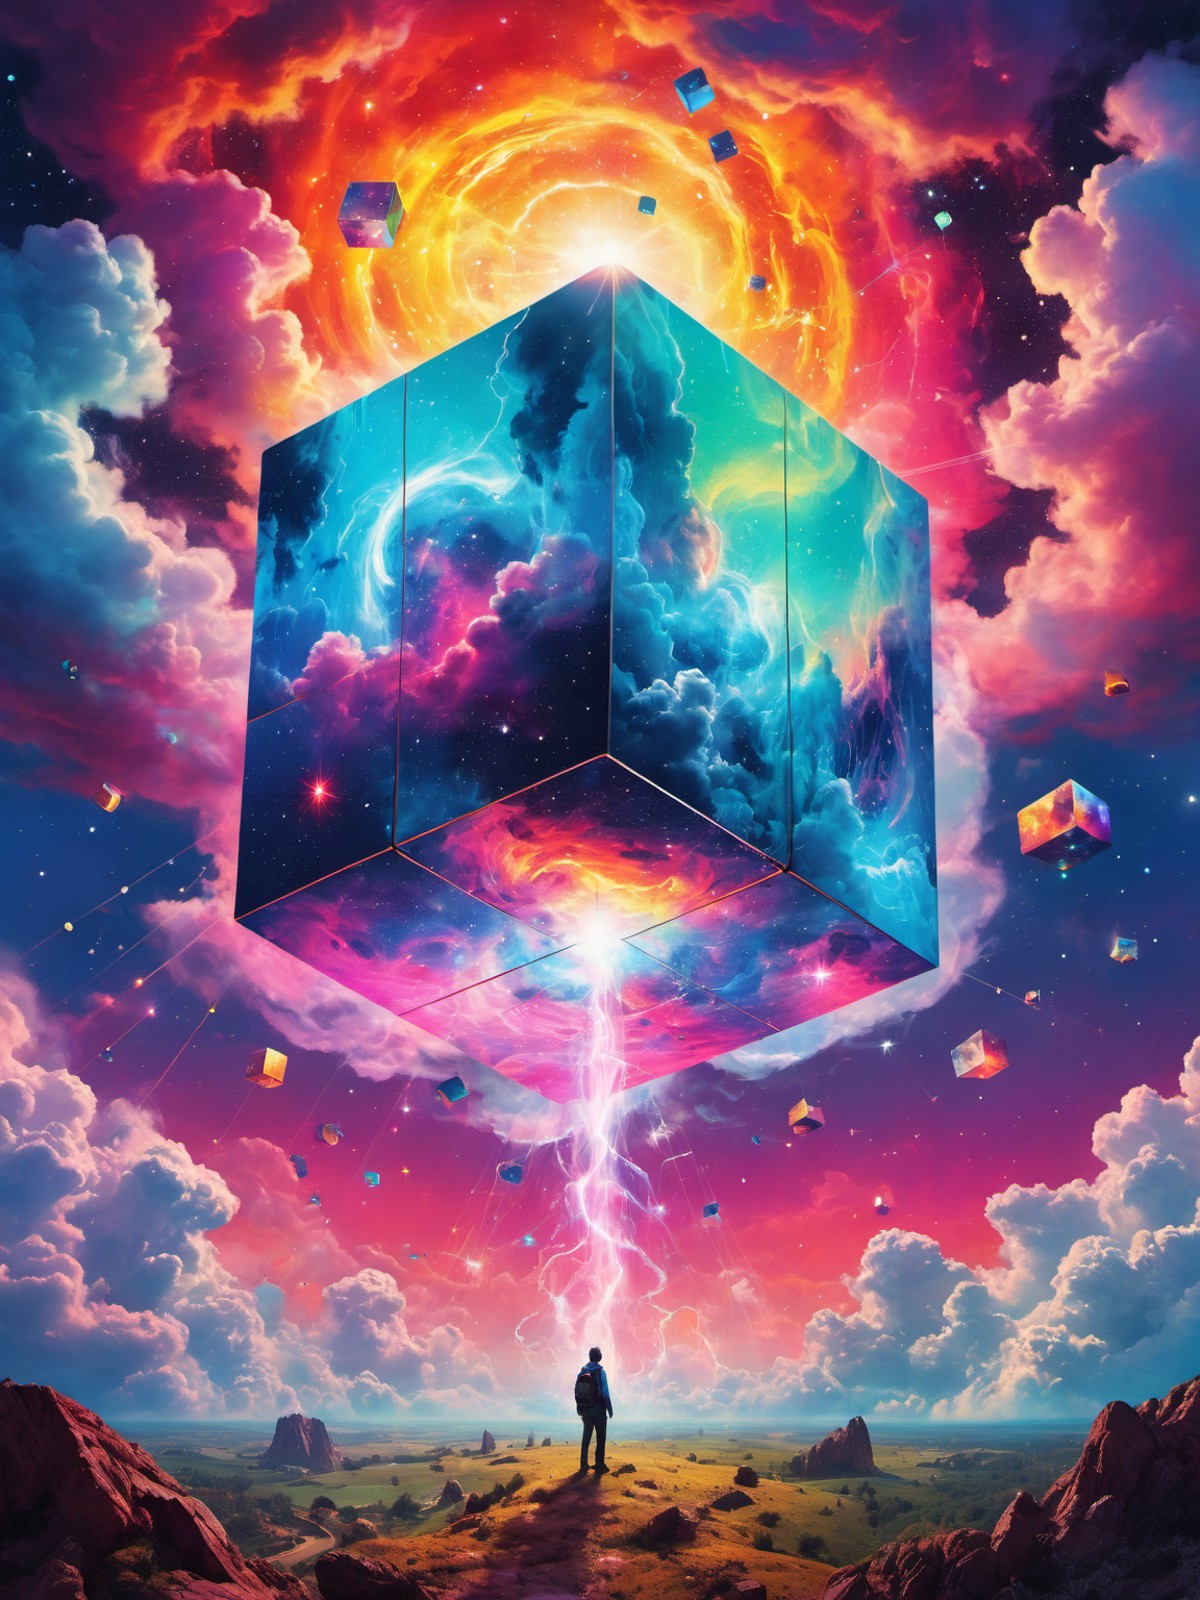 GTA-style artwork Bosch-style, a translucent cube traps eerie clouds, the starsscape warps, time distorts, surrealism reig...